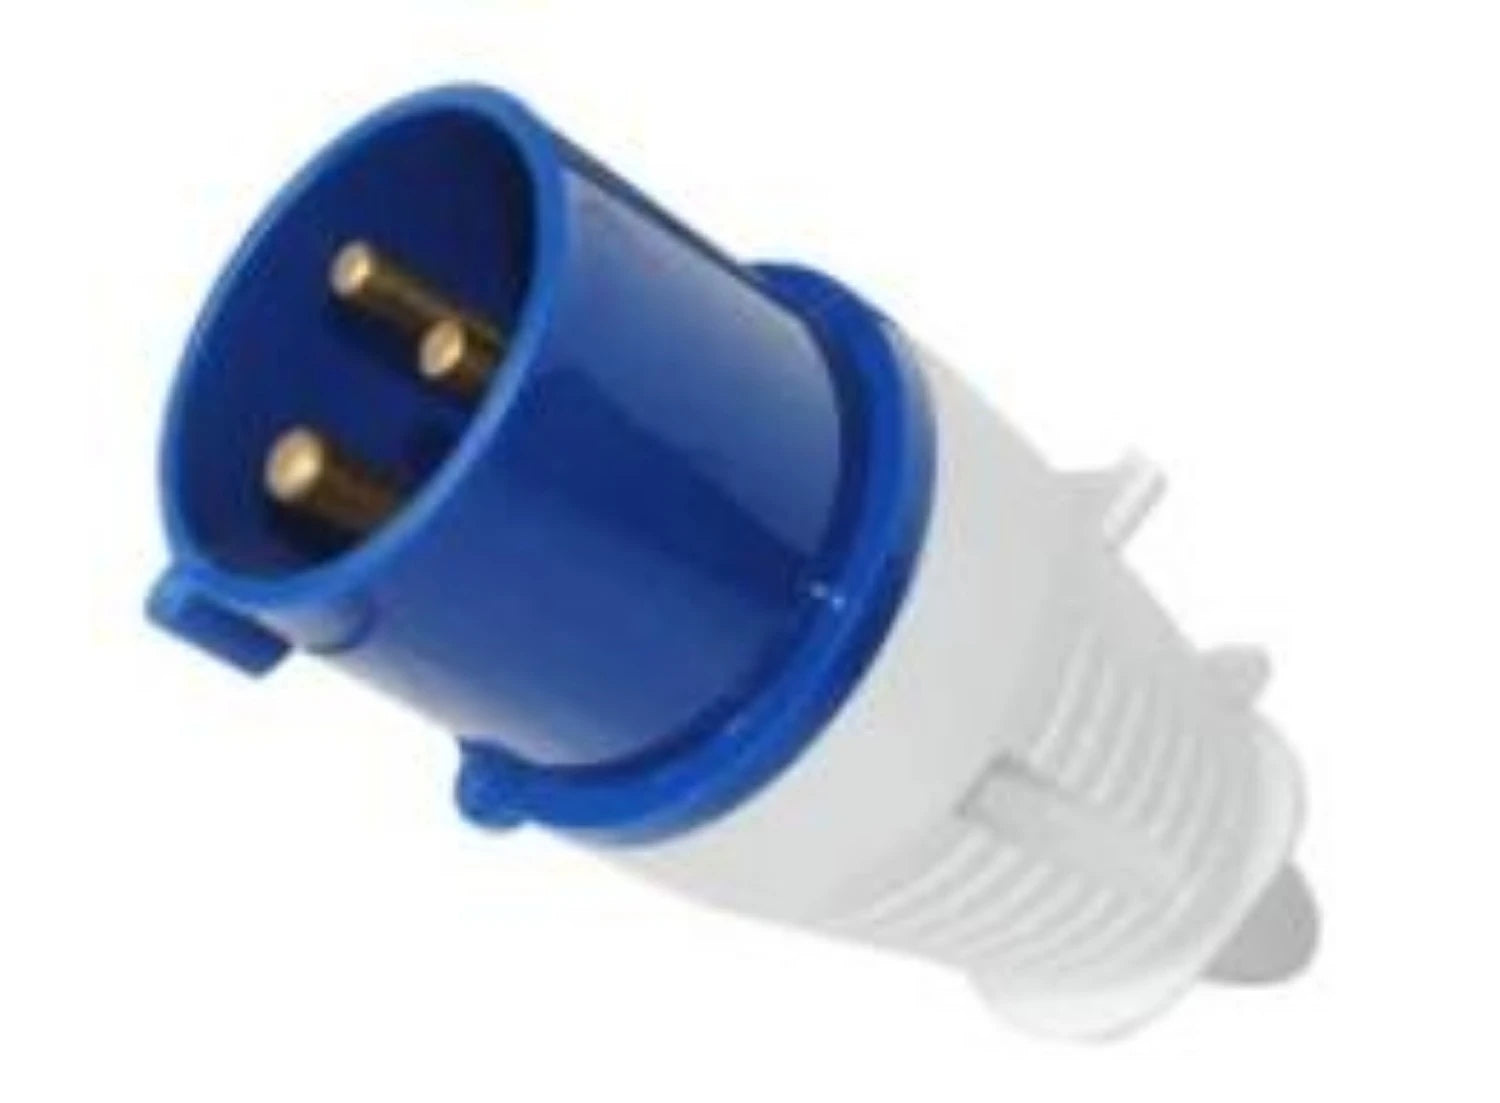 Re-wireable inline connector